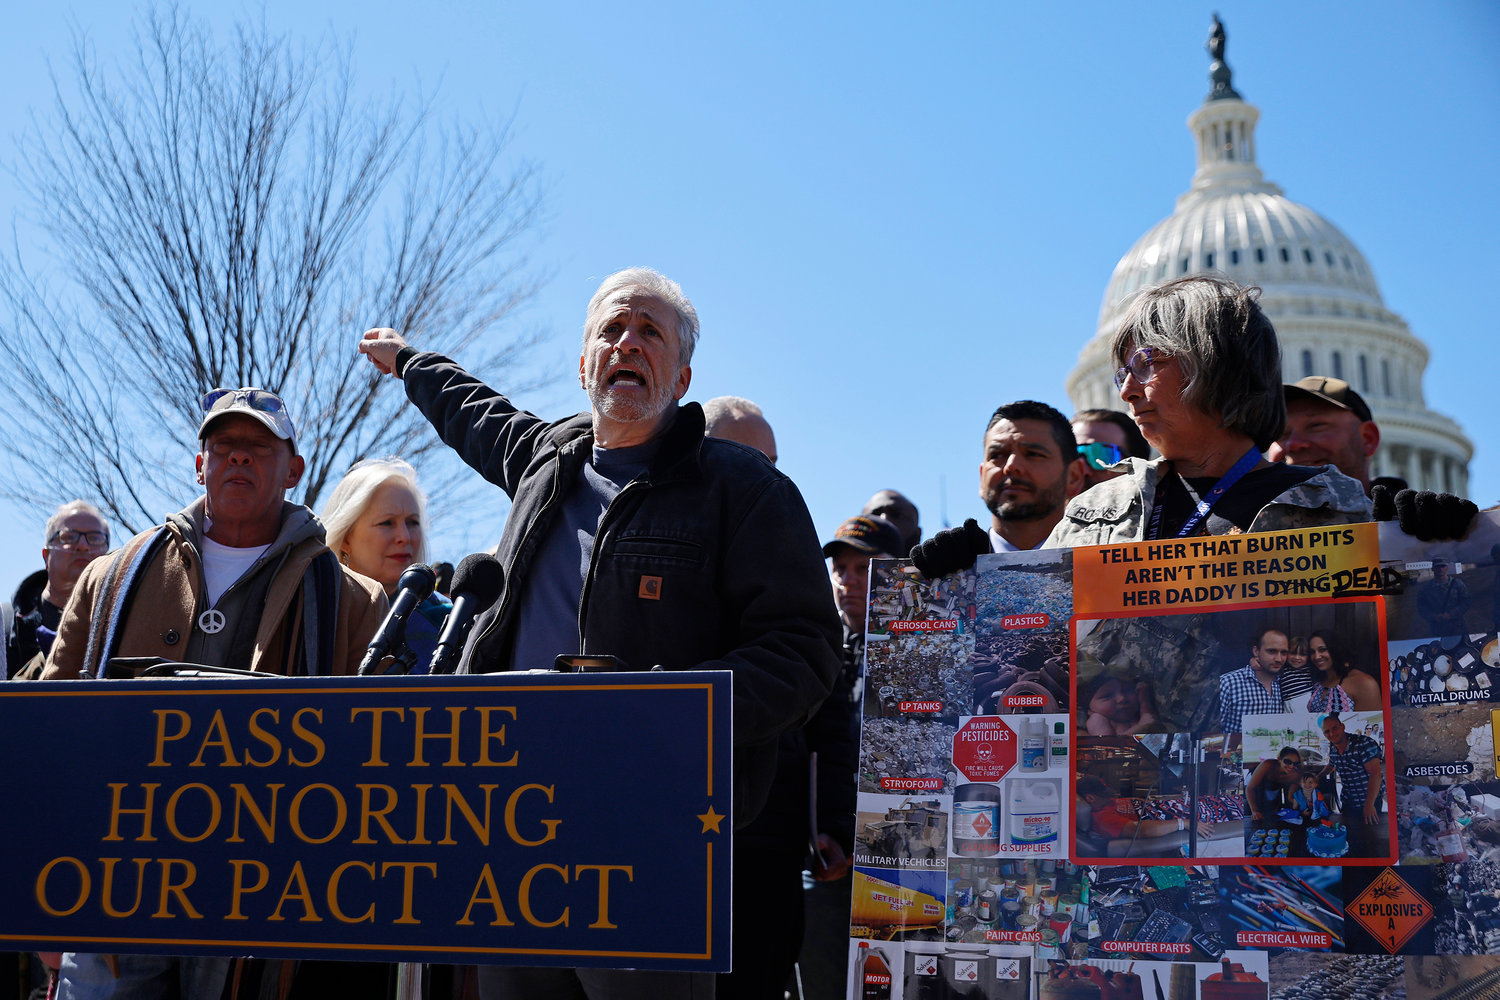 Comedian and activist Jon Stewart, middle, speaks during a news conference about military burn pits legislation with veterans advocacy groups and Democratic members of Congress outside the U.S. Capitol on Tuesday, March 29, 2022, in Washington, D.C. (Chip Somodevilla/Getty Images/TNS)